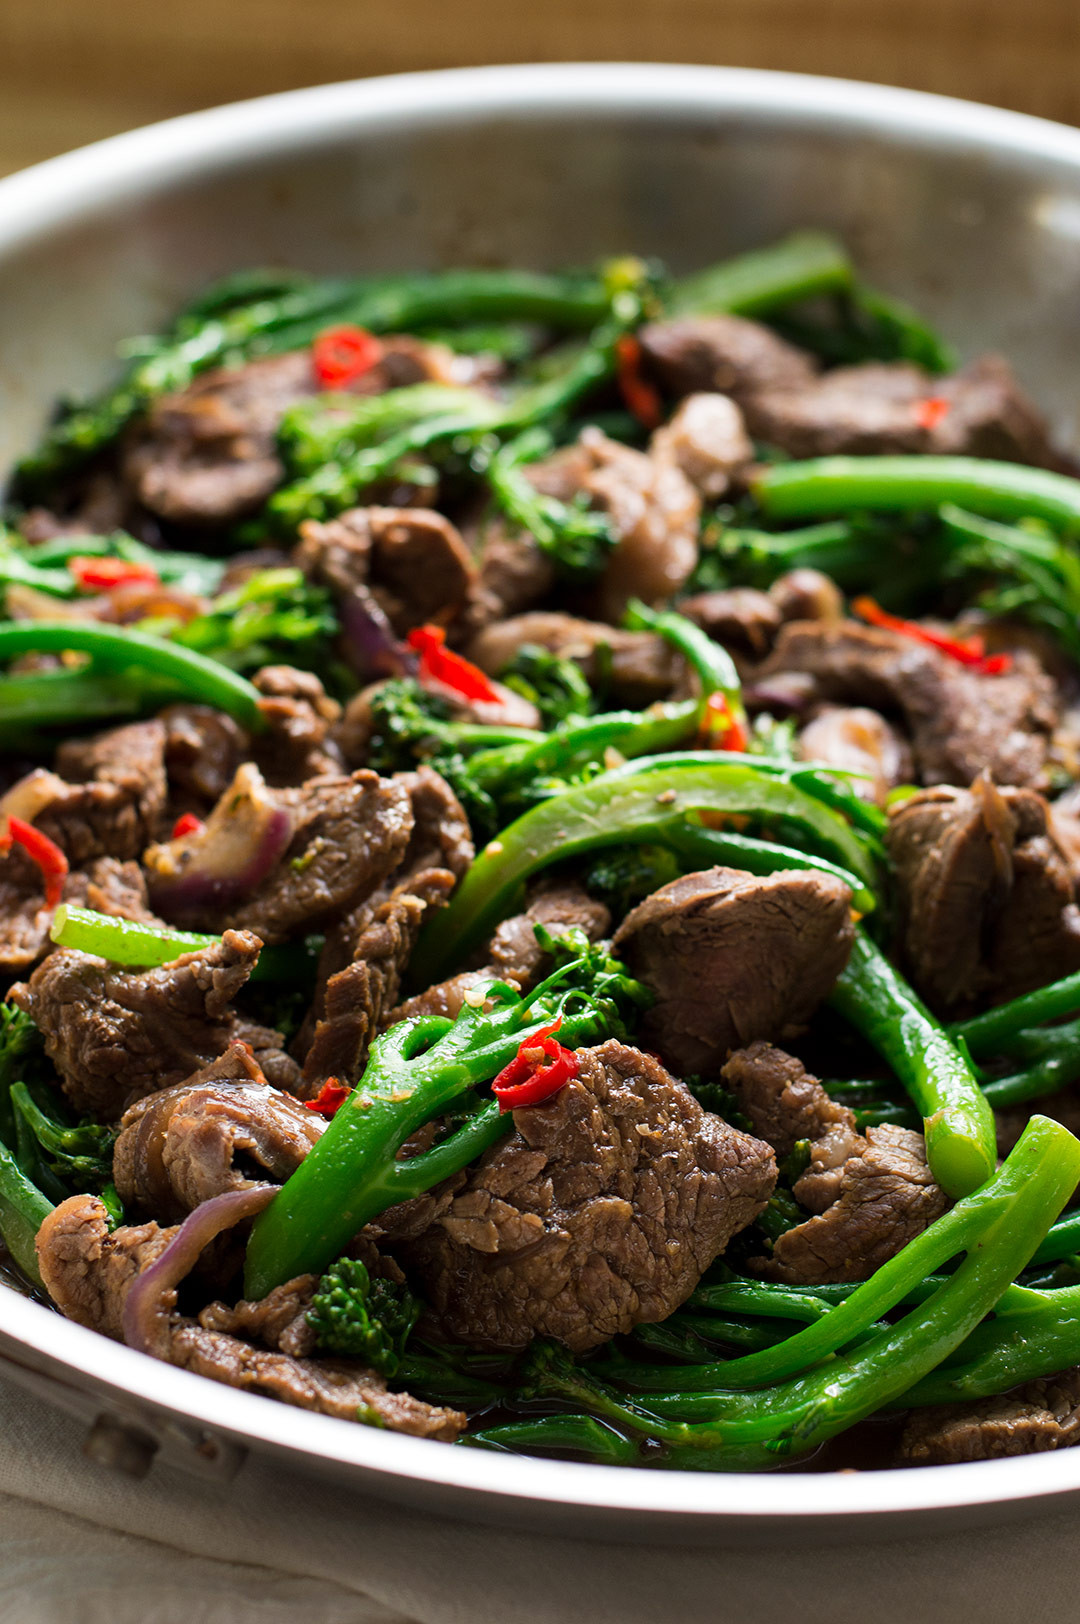 Broccoli Beef Stir Fry
 Looking for inspiration Try our quick and easy beef